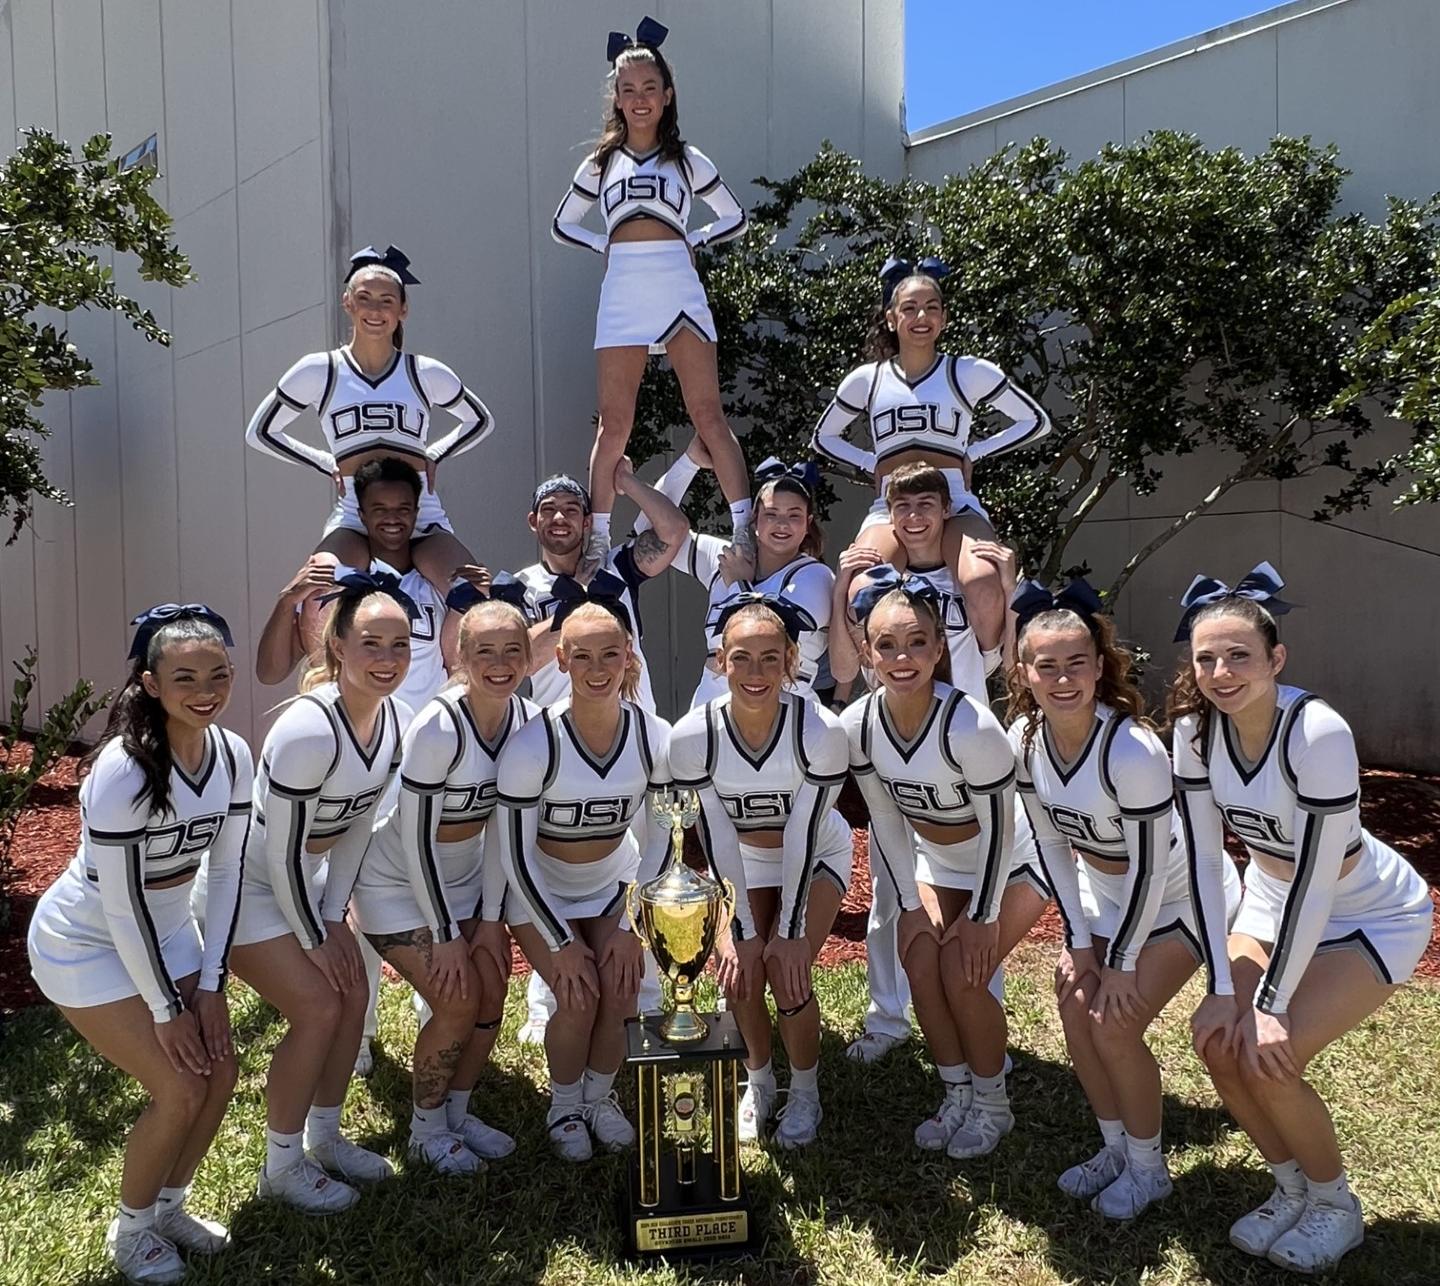 Blue Hawks take home third place at NCA Nationals